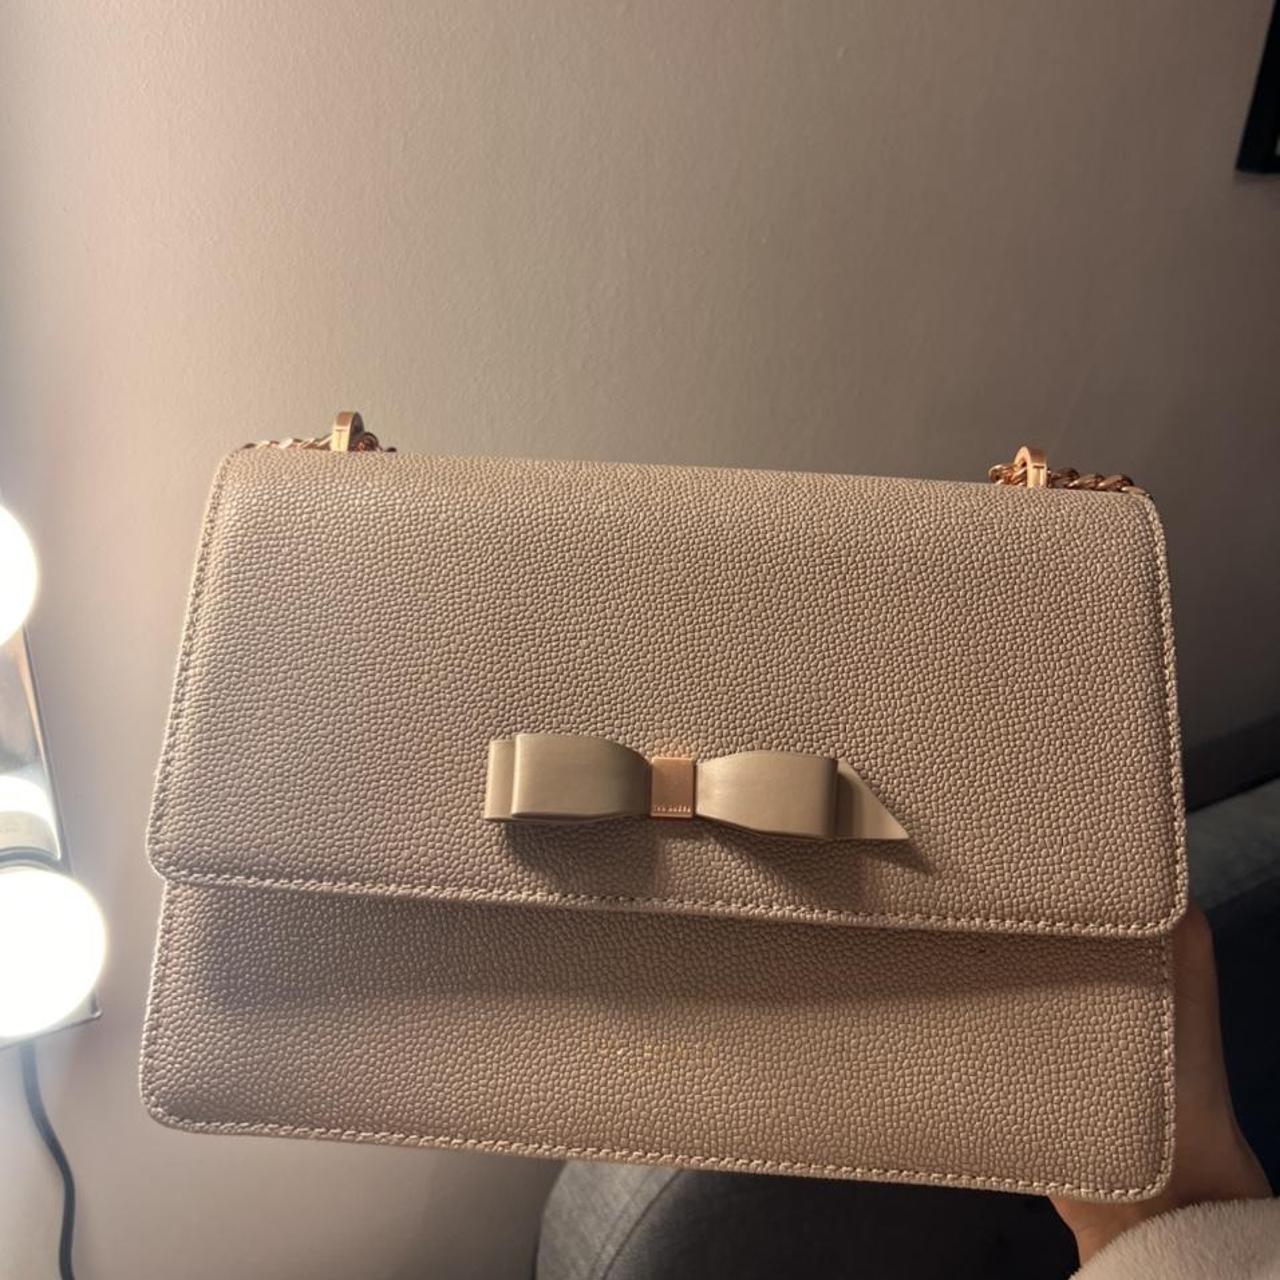 Ted baker nude and rose gold bag, only worn a couple